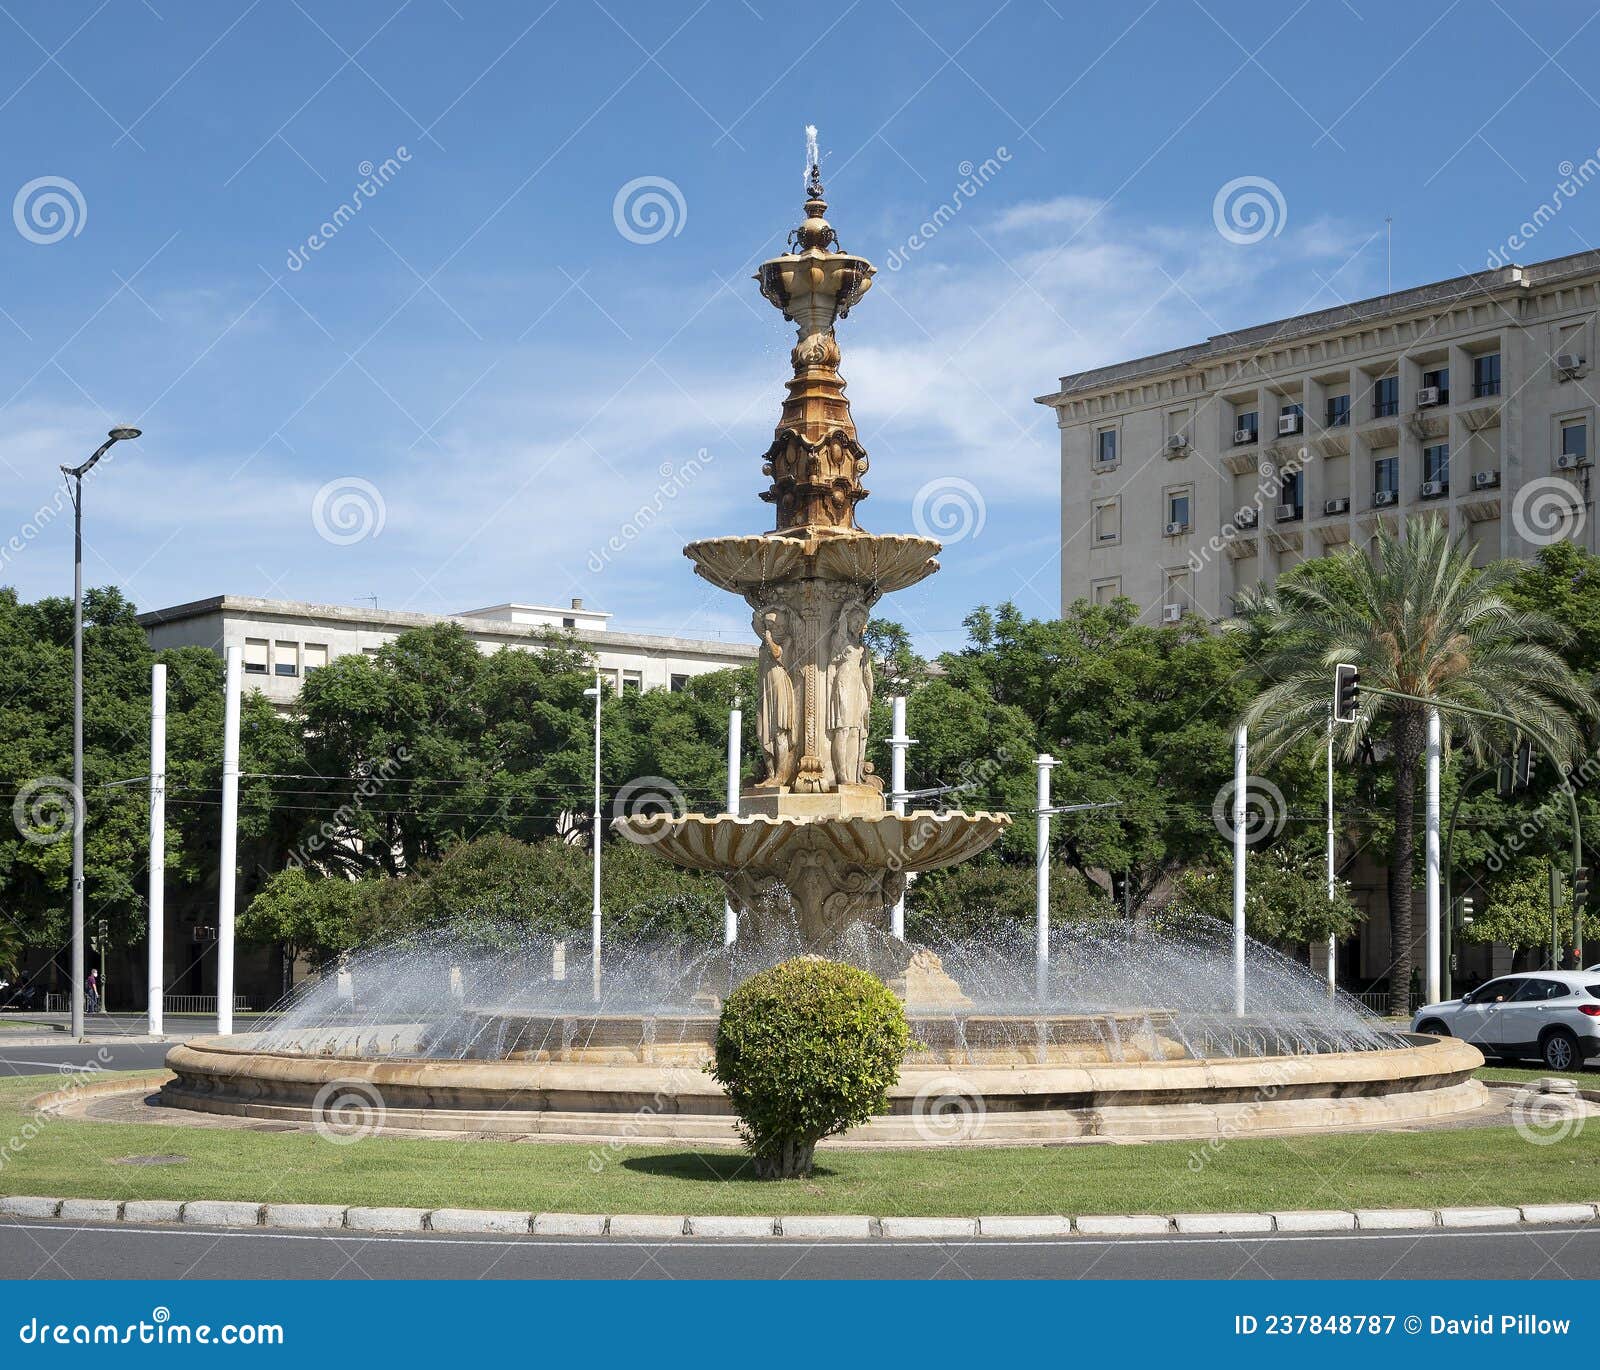 fountain of the four seasons by manuel delgado brackembury in 1929, on a roundabout in serville, andalusia, spain.